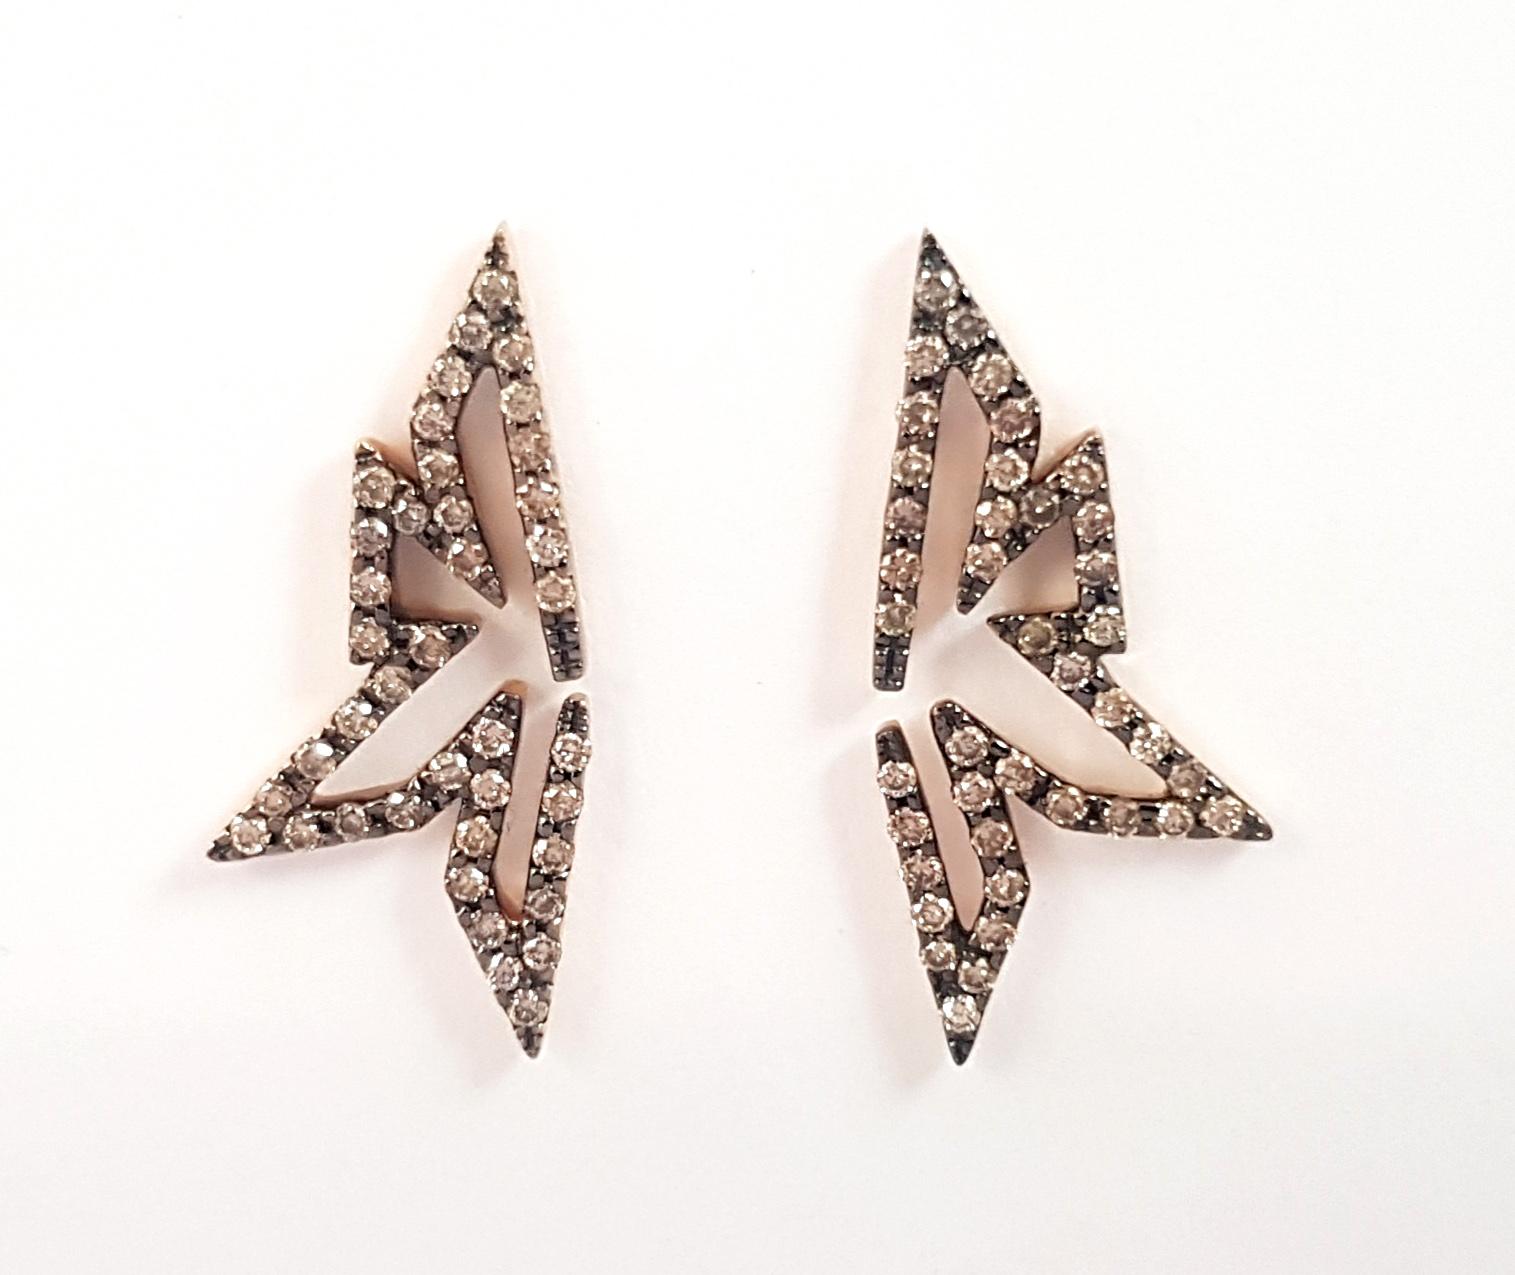 Champagne Diamonds 0.60 carat Earrings set in 18K Rose Gold Settings

Width: 1.0 cm
Length: 2.5 cm
Weight: 4.62 grams

The ancient Japanese tradition of paper folding has inspired the form and elements of this modern collection. With a series of